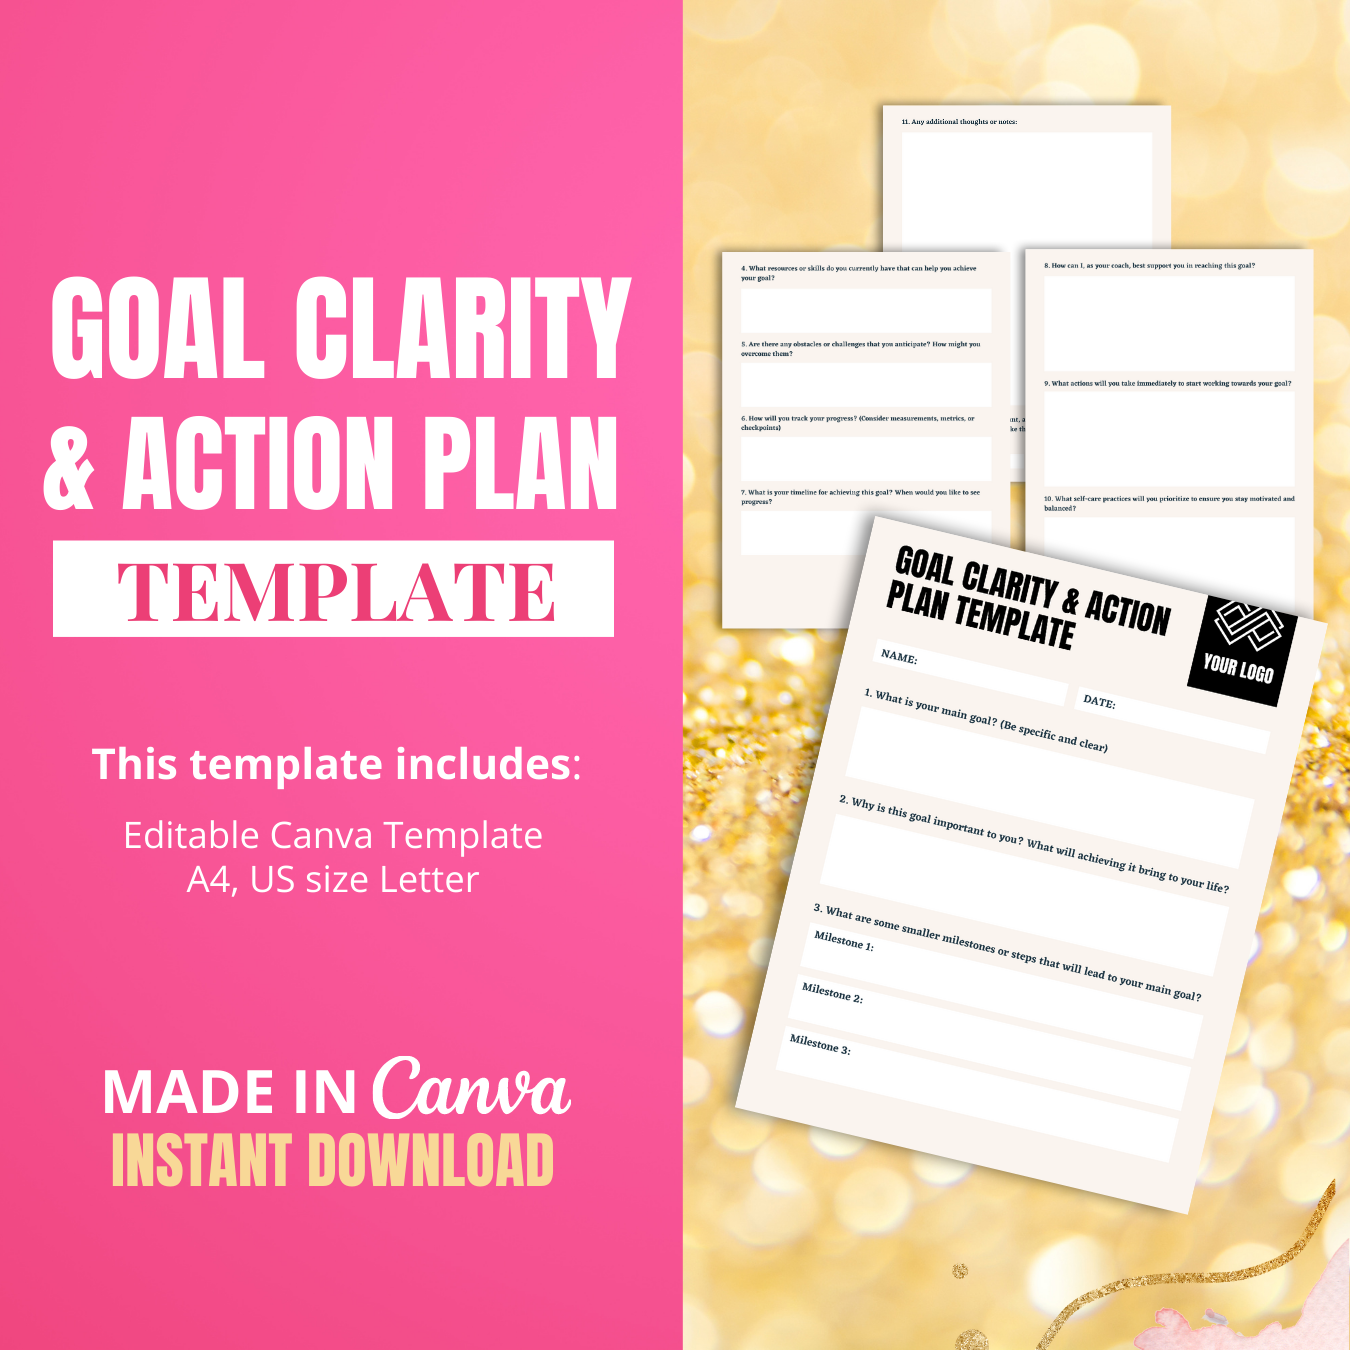 Goal Clarity & Action Plan Template